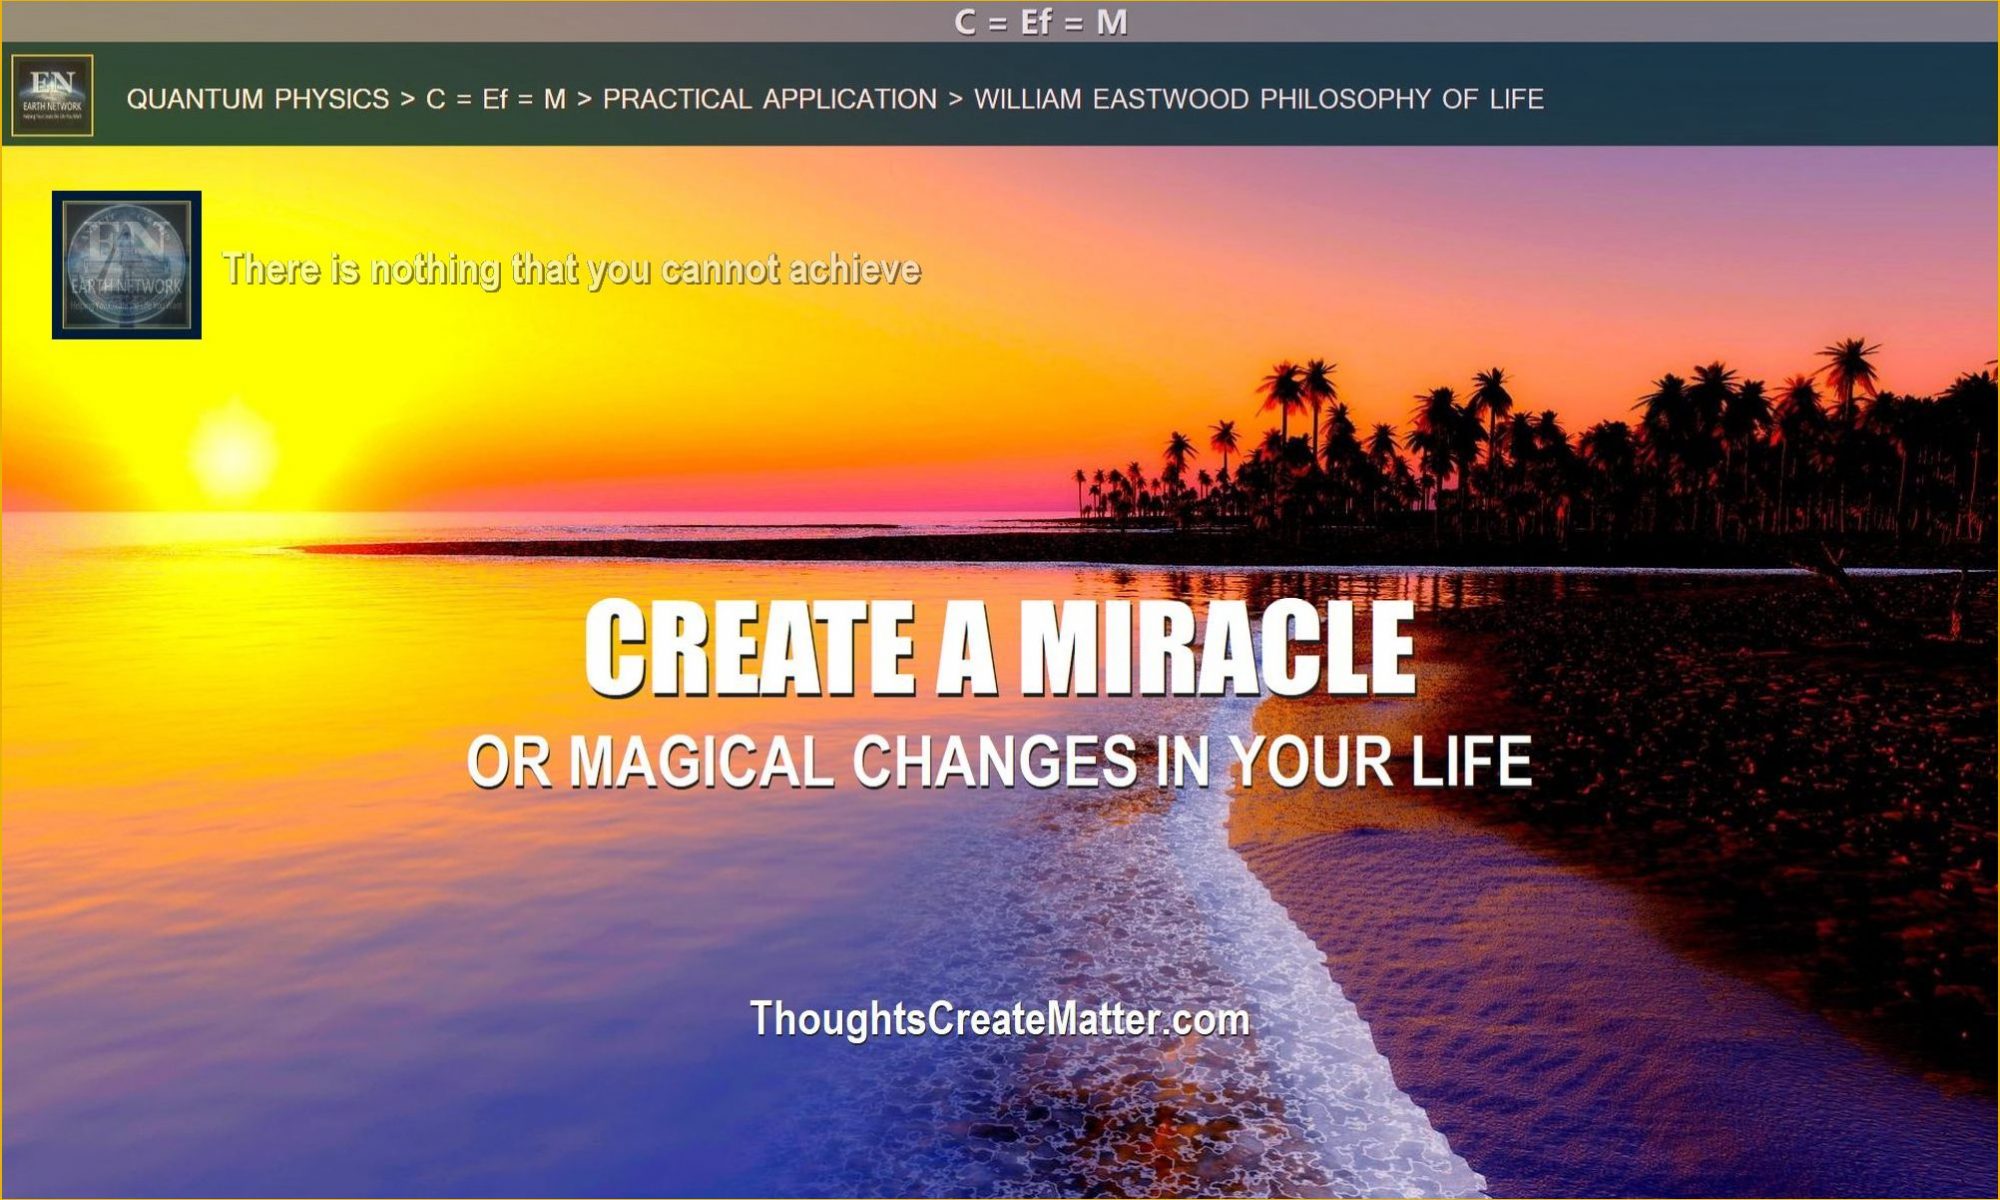 Paradise-depicts-miracle-and-how-to-use-my-mind-thoughts-to-create-miracles-change-magic-metaphysics